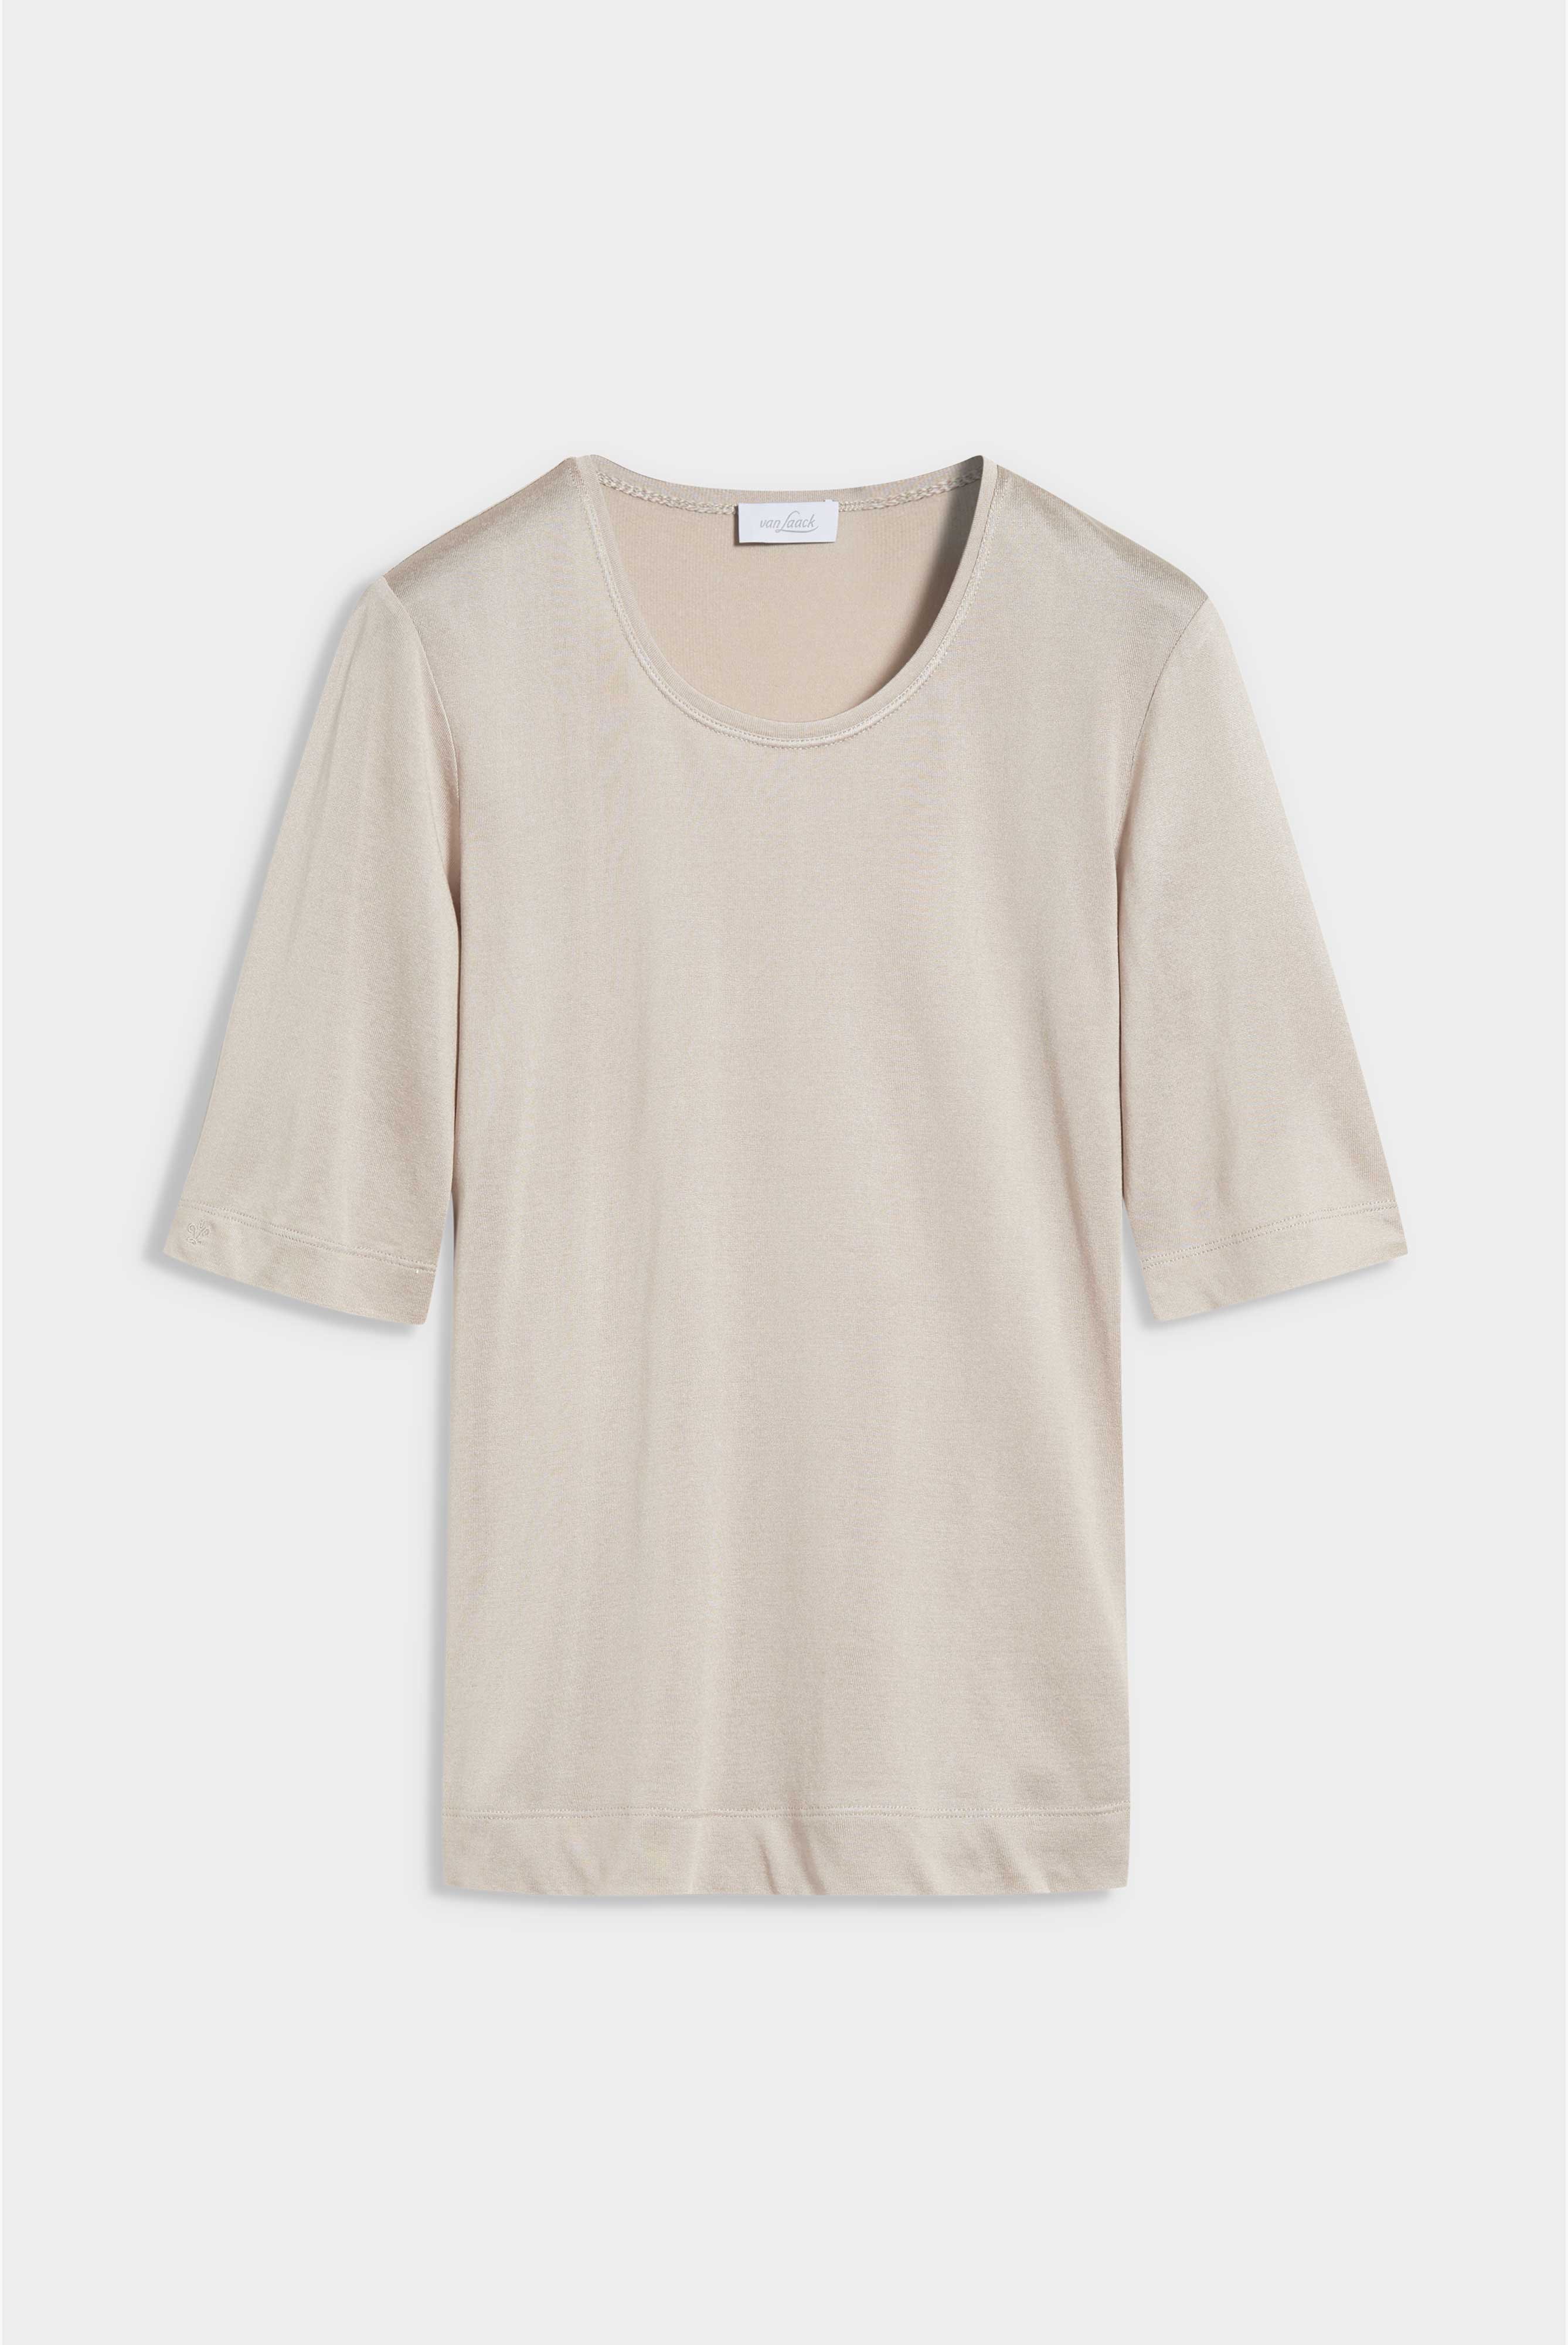 Tops & T-Shirts+Roundneck T-shirt with Silk+07.2122..Z20090.120.32